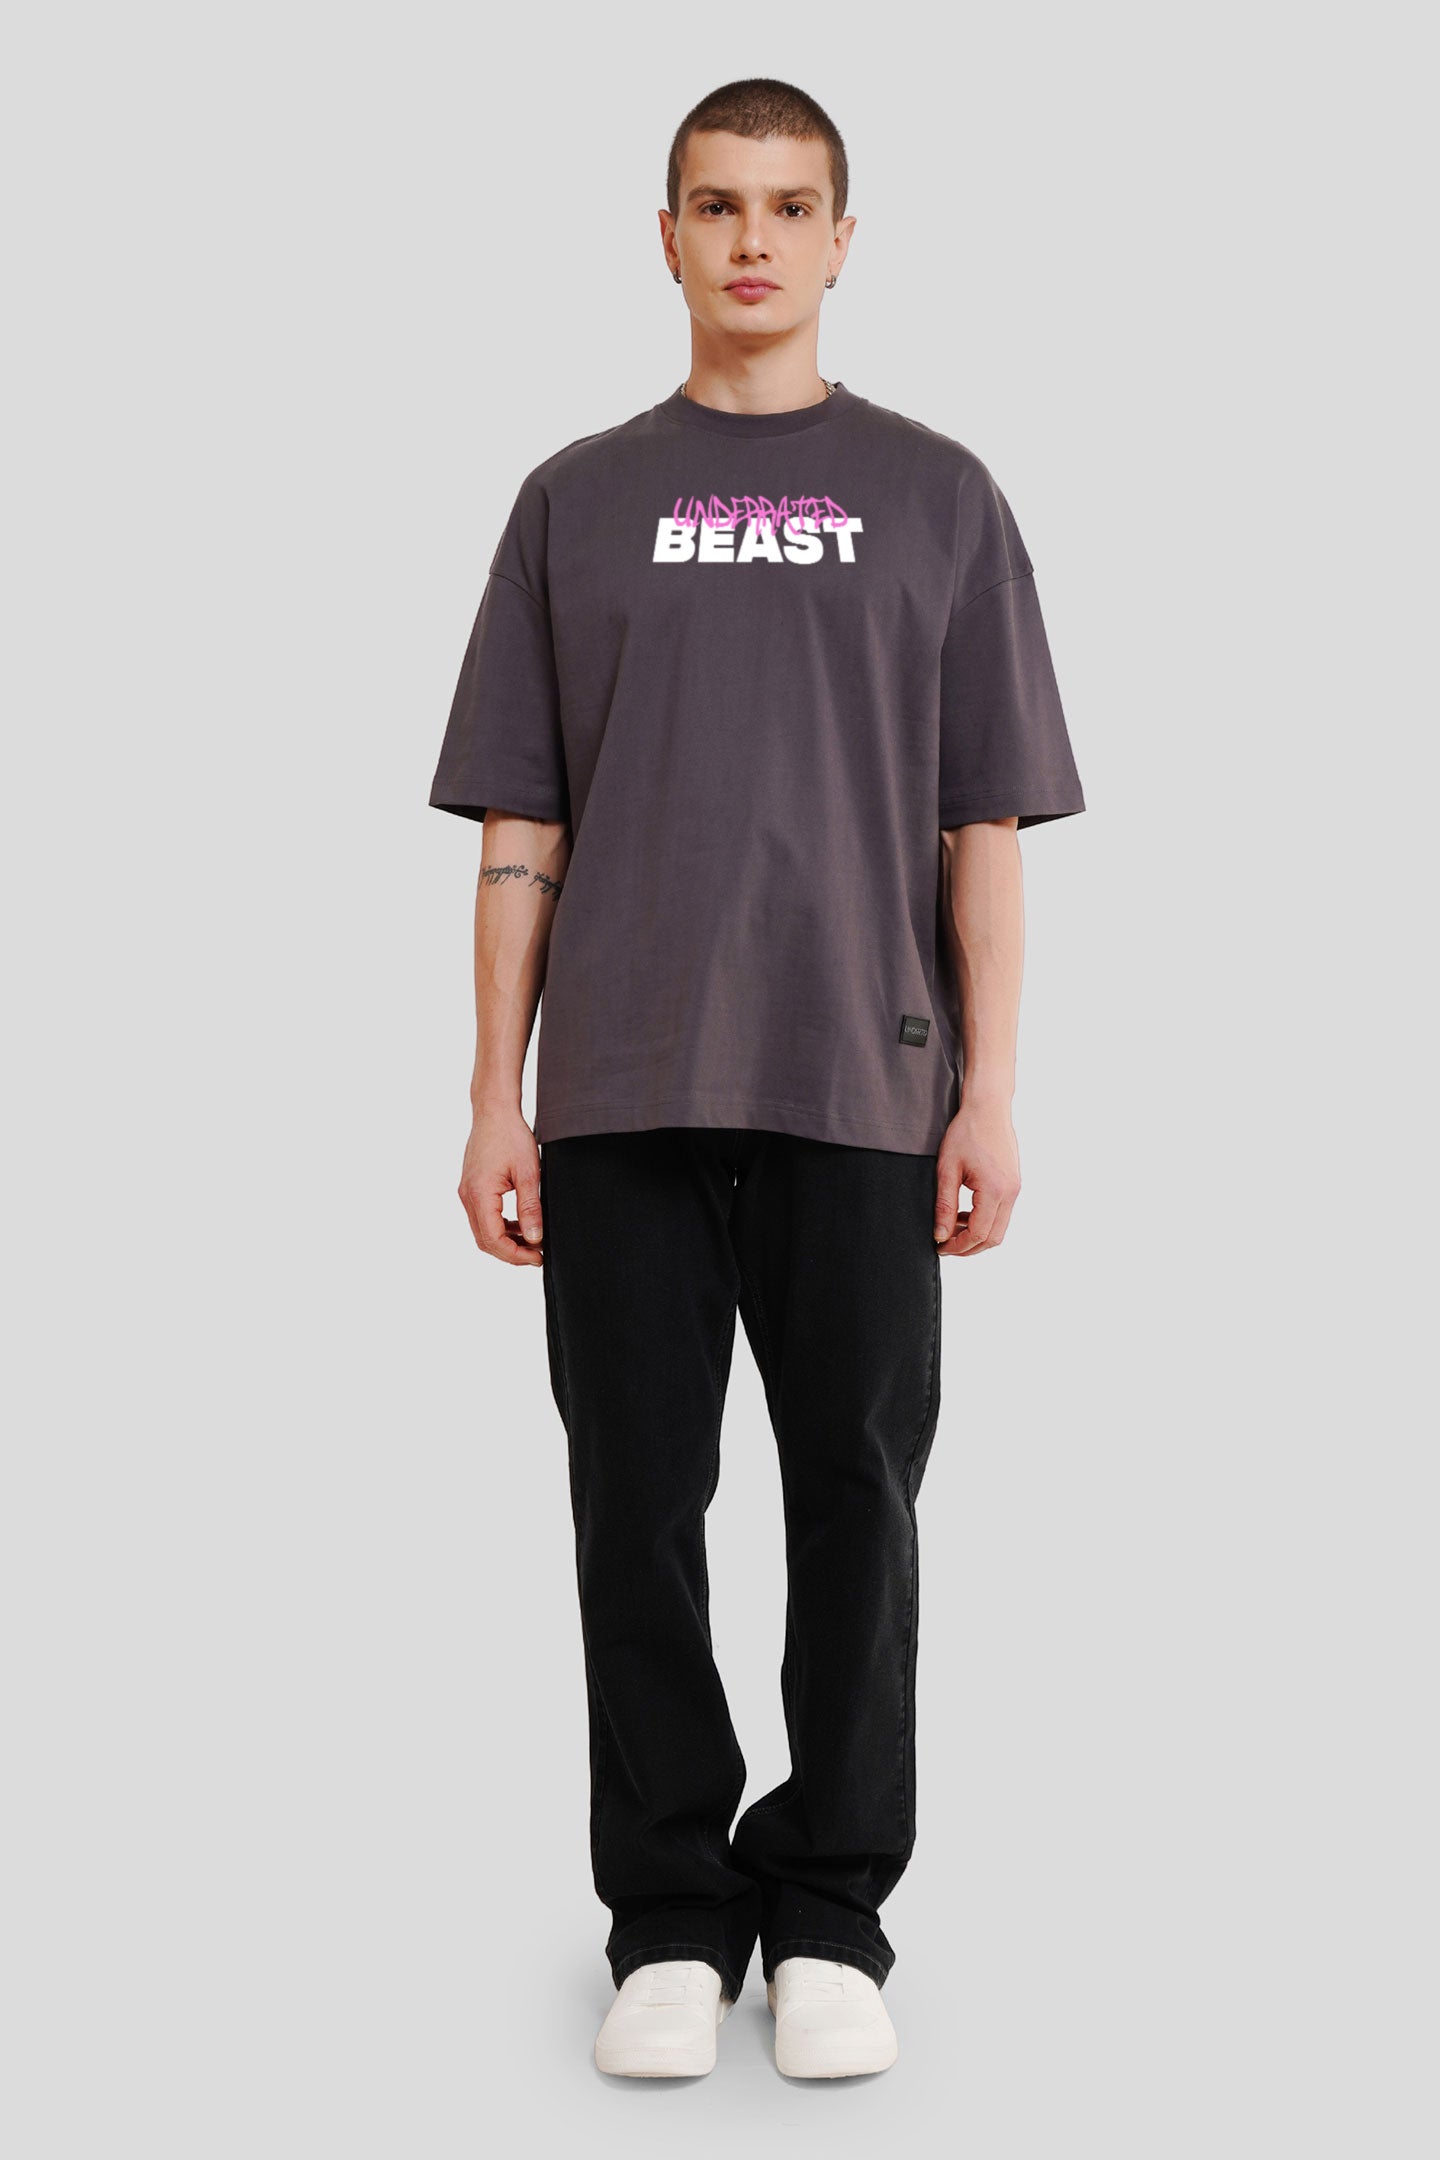 Beast Dark Grey Printed T Shirt Men Baggy Fit With Front Design Pic 4